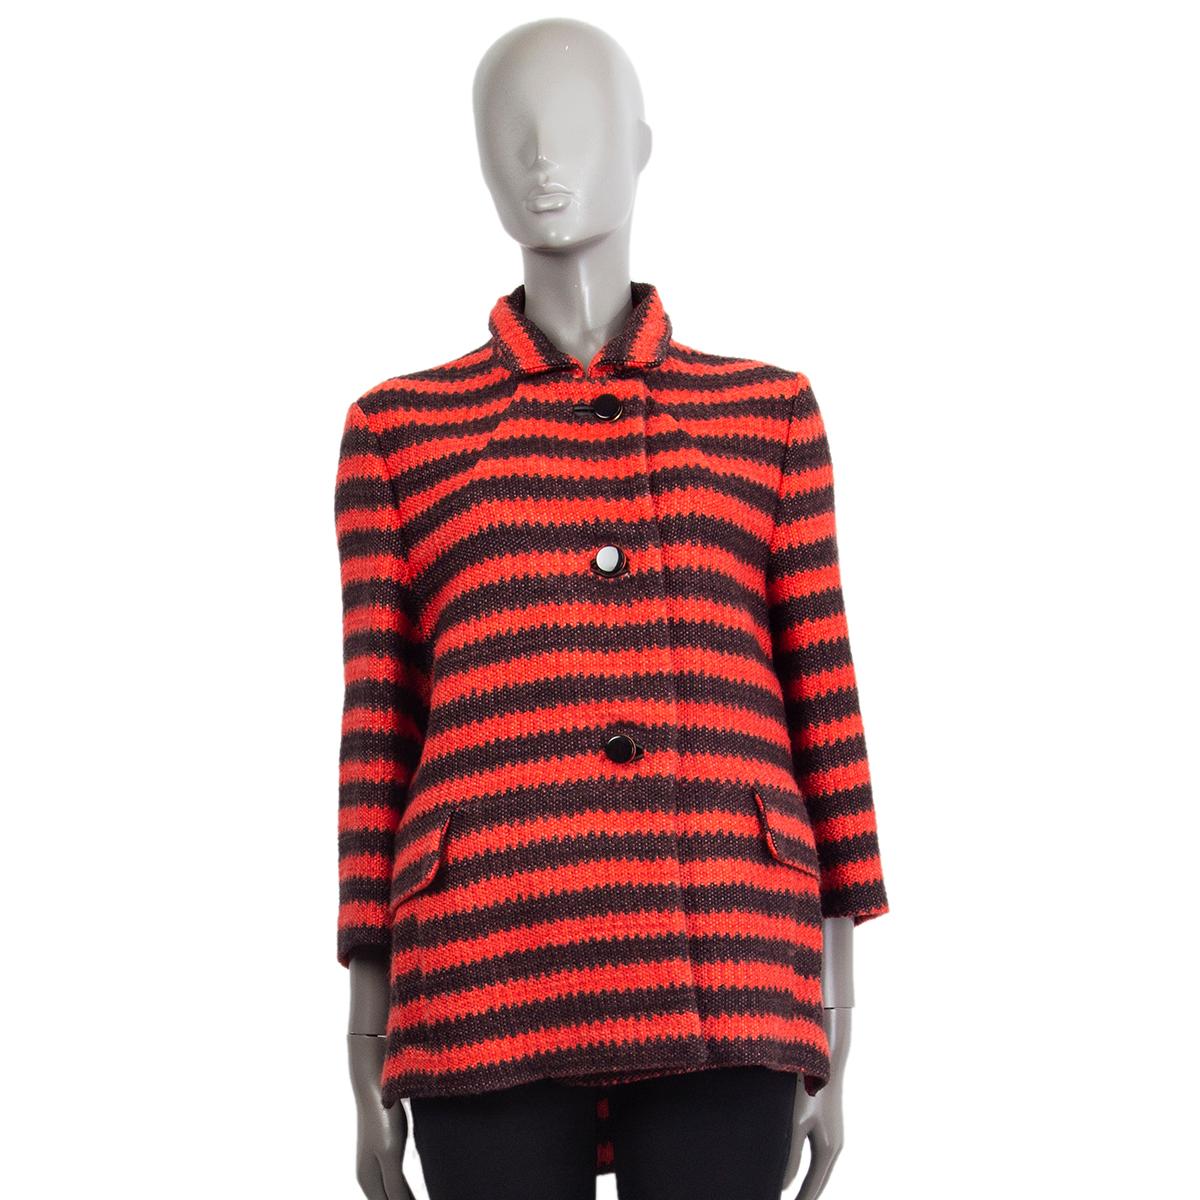 MARNI black & coral wool STRIPED 3/4 SLEEVE KNIT Peacoat Coat Jacket 40 S For Sale